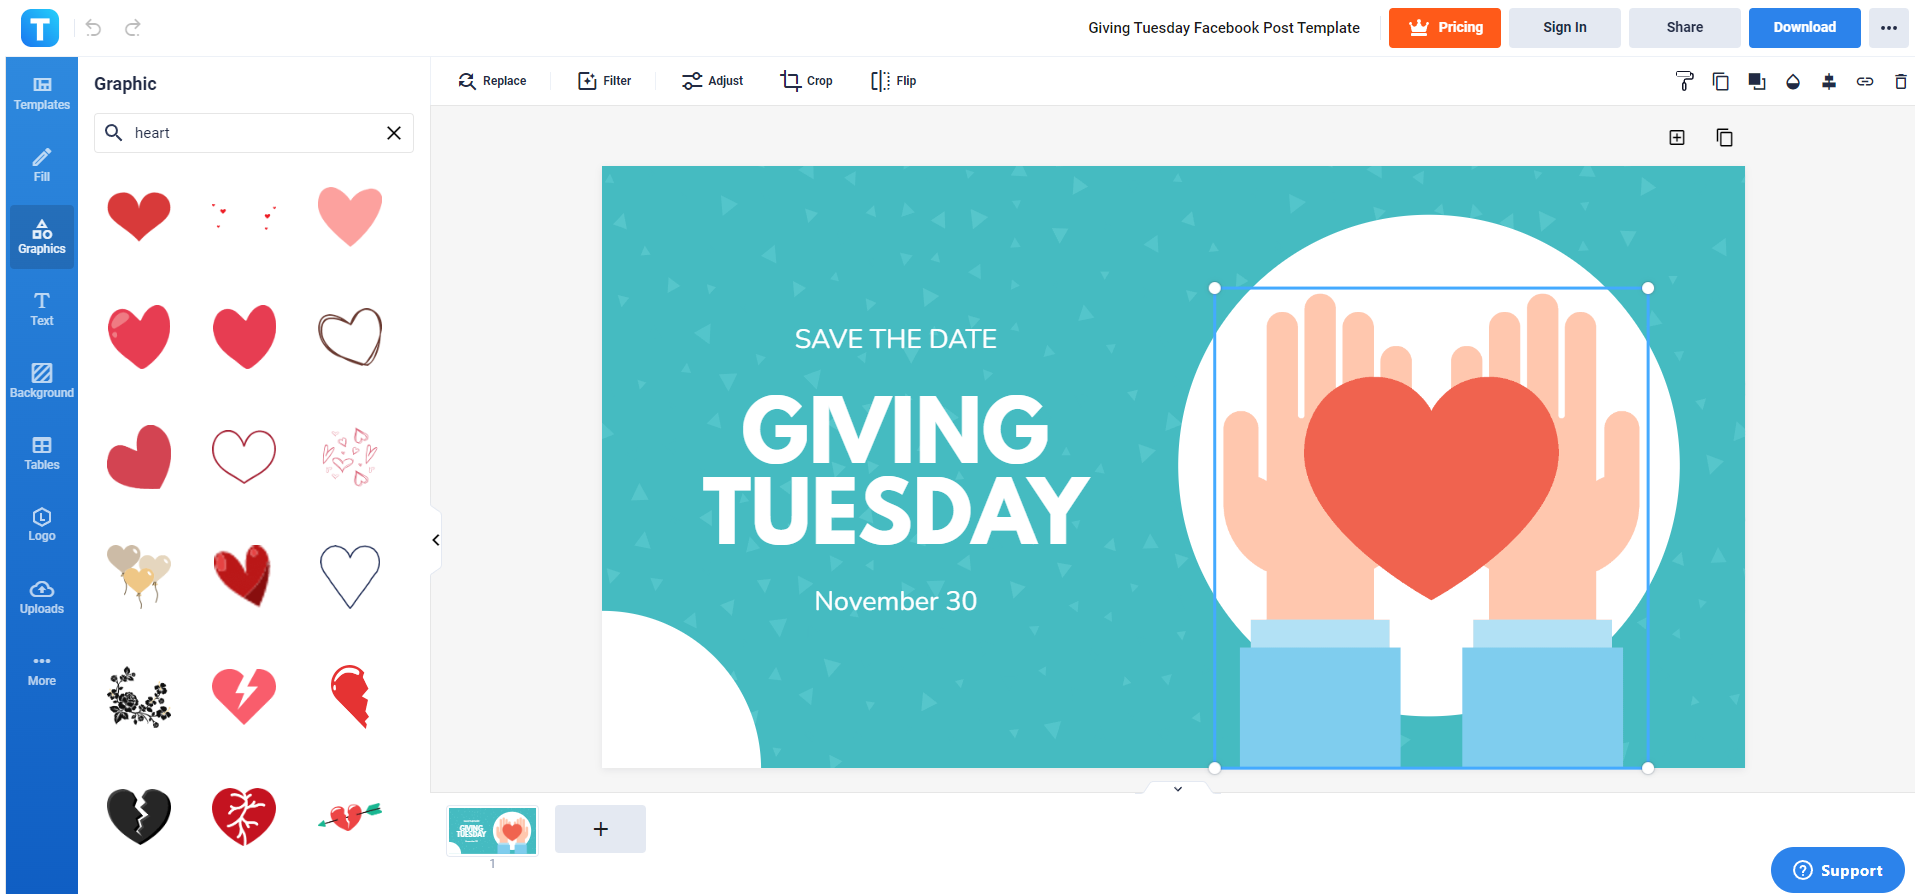 giving tuesday facebook post template